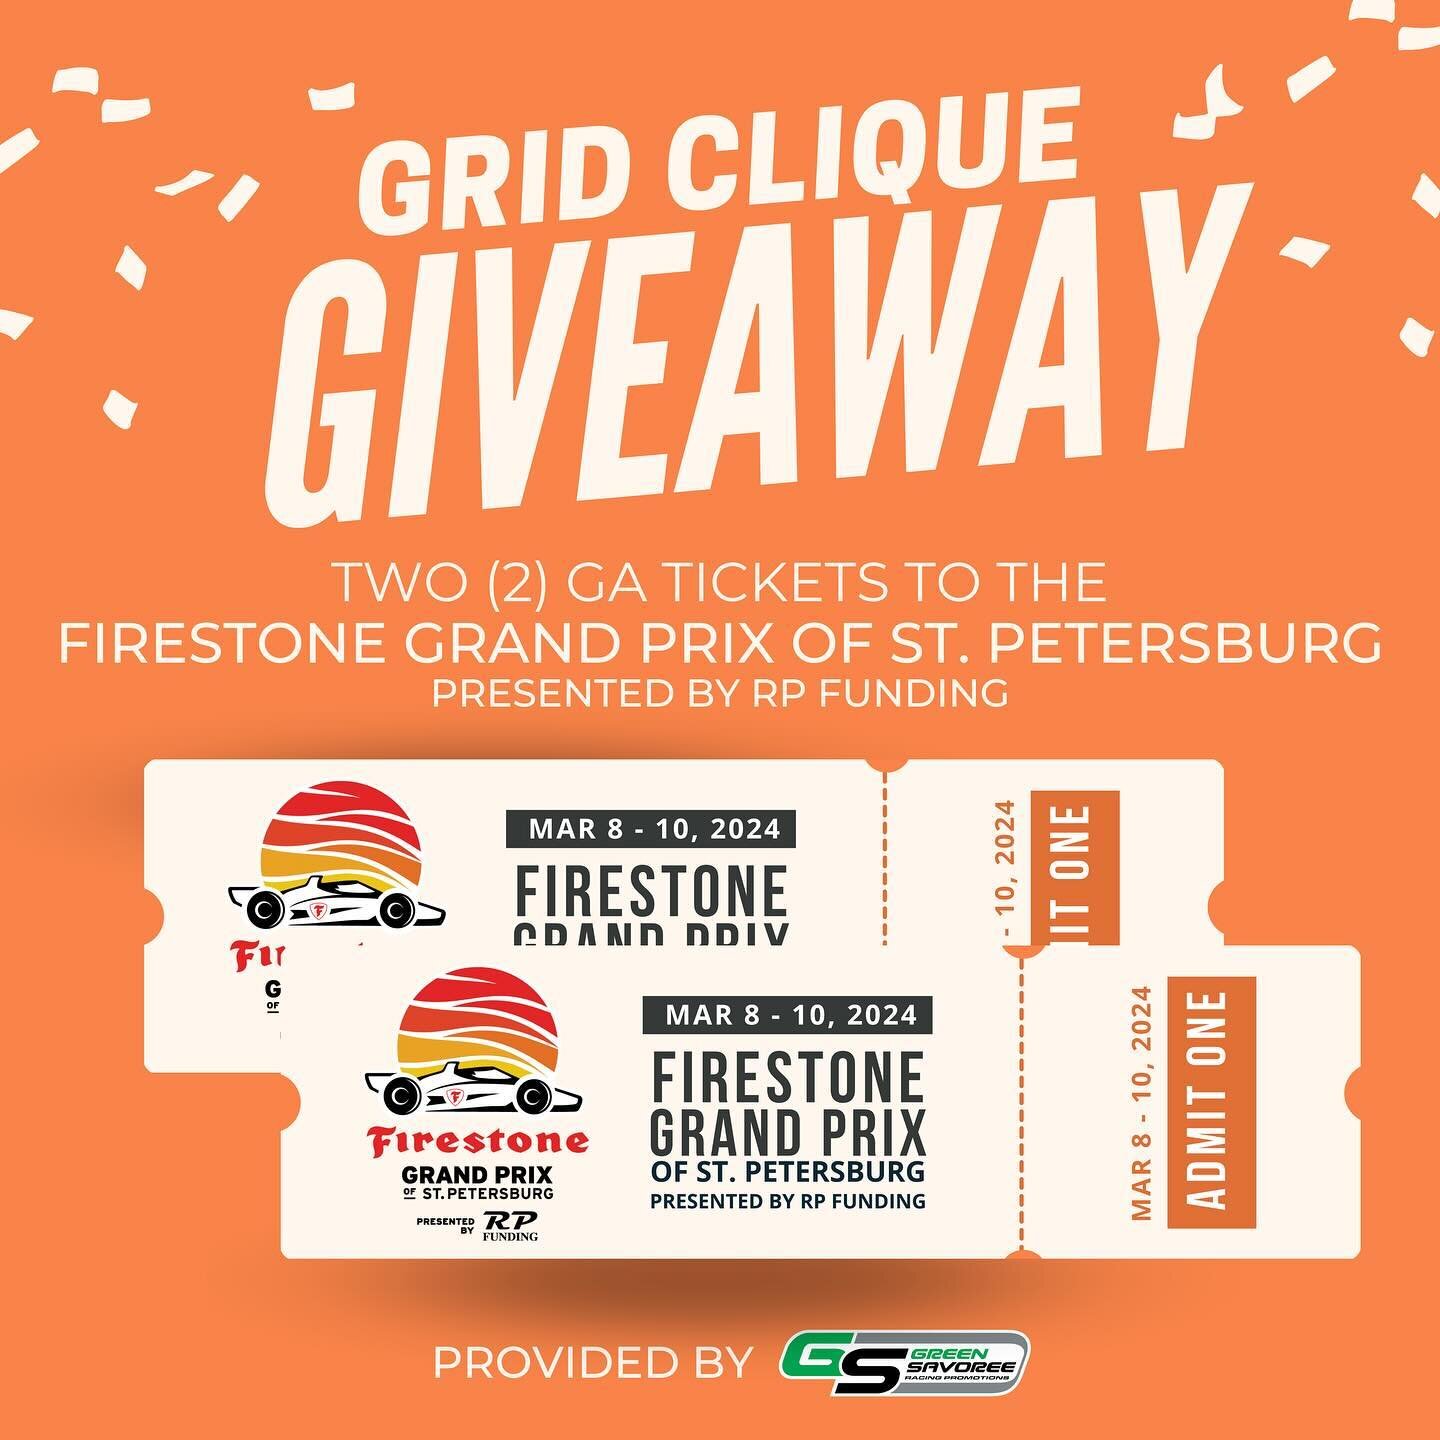 📢 WANNA GO TO THE INDYCAR SEASON OPENER? 

We gotchu 😉 We&rsquo;re giving away 2 GA TICKETS to the @indycar Firestone Grand Prix in beautiful St. Petersberg, Florida March 8-10! To enter:

✨ Make sure you&rsquo;re following @gridclique 
✨ Comment t